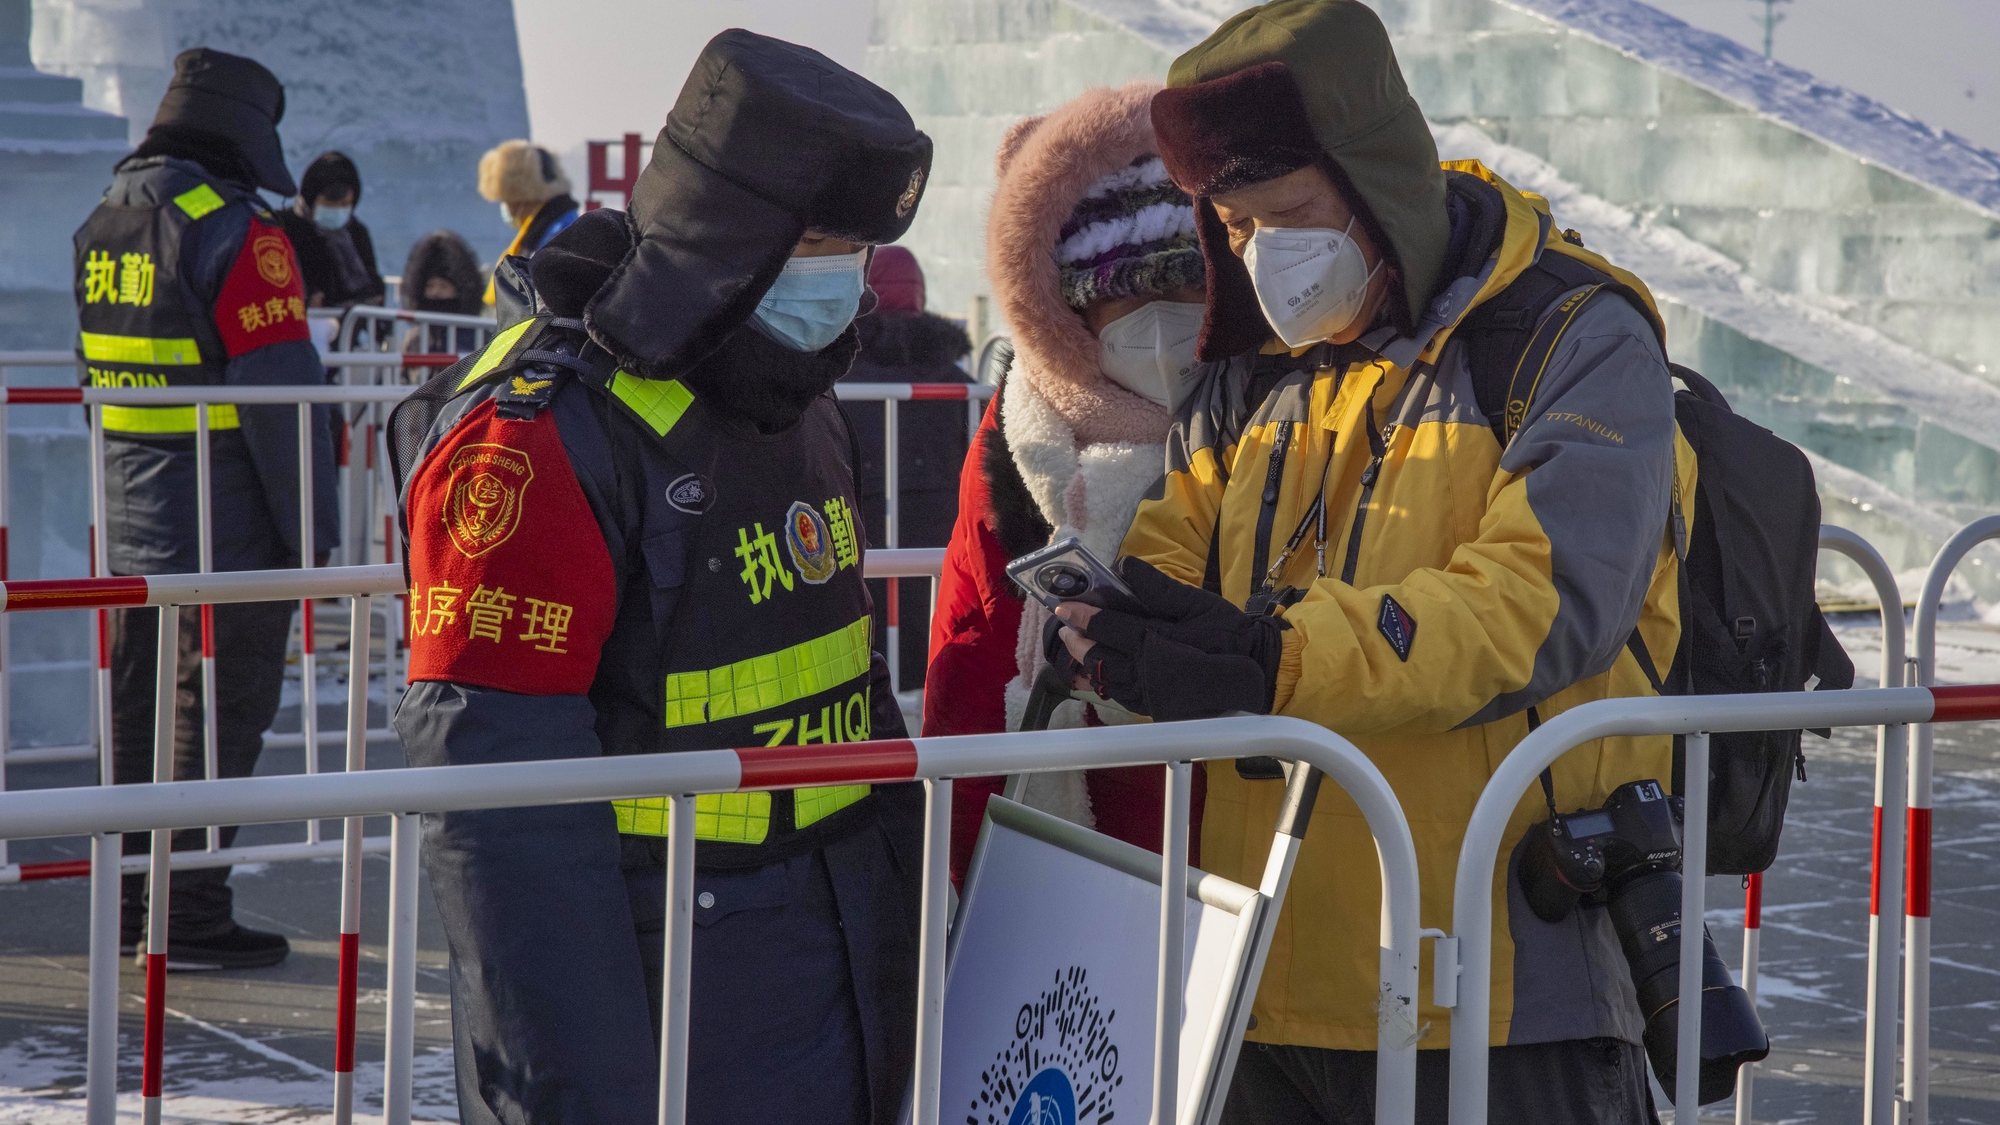 epa08939904 Security officers check people&#039;s health QR codes and measure their body temperature in Harbin, Heilongjiang province, China, 15 January 2021. According to the National Health Commission, there are 144 COVID-19 new cases reported in mainland China on 15 January. China&#039;s northeastern Heilongjiang province on 13 January declared a state of emergency as the outbreak spreads. Suihua city on the border with Russia has been locked down as well as other small cities nearby. The latest outbreak happened in Hebei province near Beijing. The capital city Shijiazhuang, Xingtai and Langfang cities, are also sealed. Other provinces and cities have imposed strict measures and 14 days of quarantine for returning home residents. The Chinese government discourages people from traveling during the Lunar New Year festival, which is the biggest human migration in the world. The government advises citizens to stay safe and gather with their families online.  EPA/ALEX PLAVEVSKI